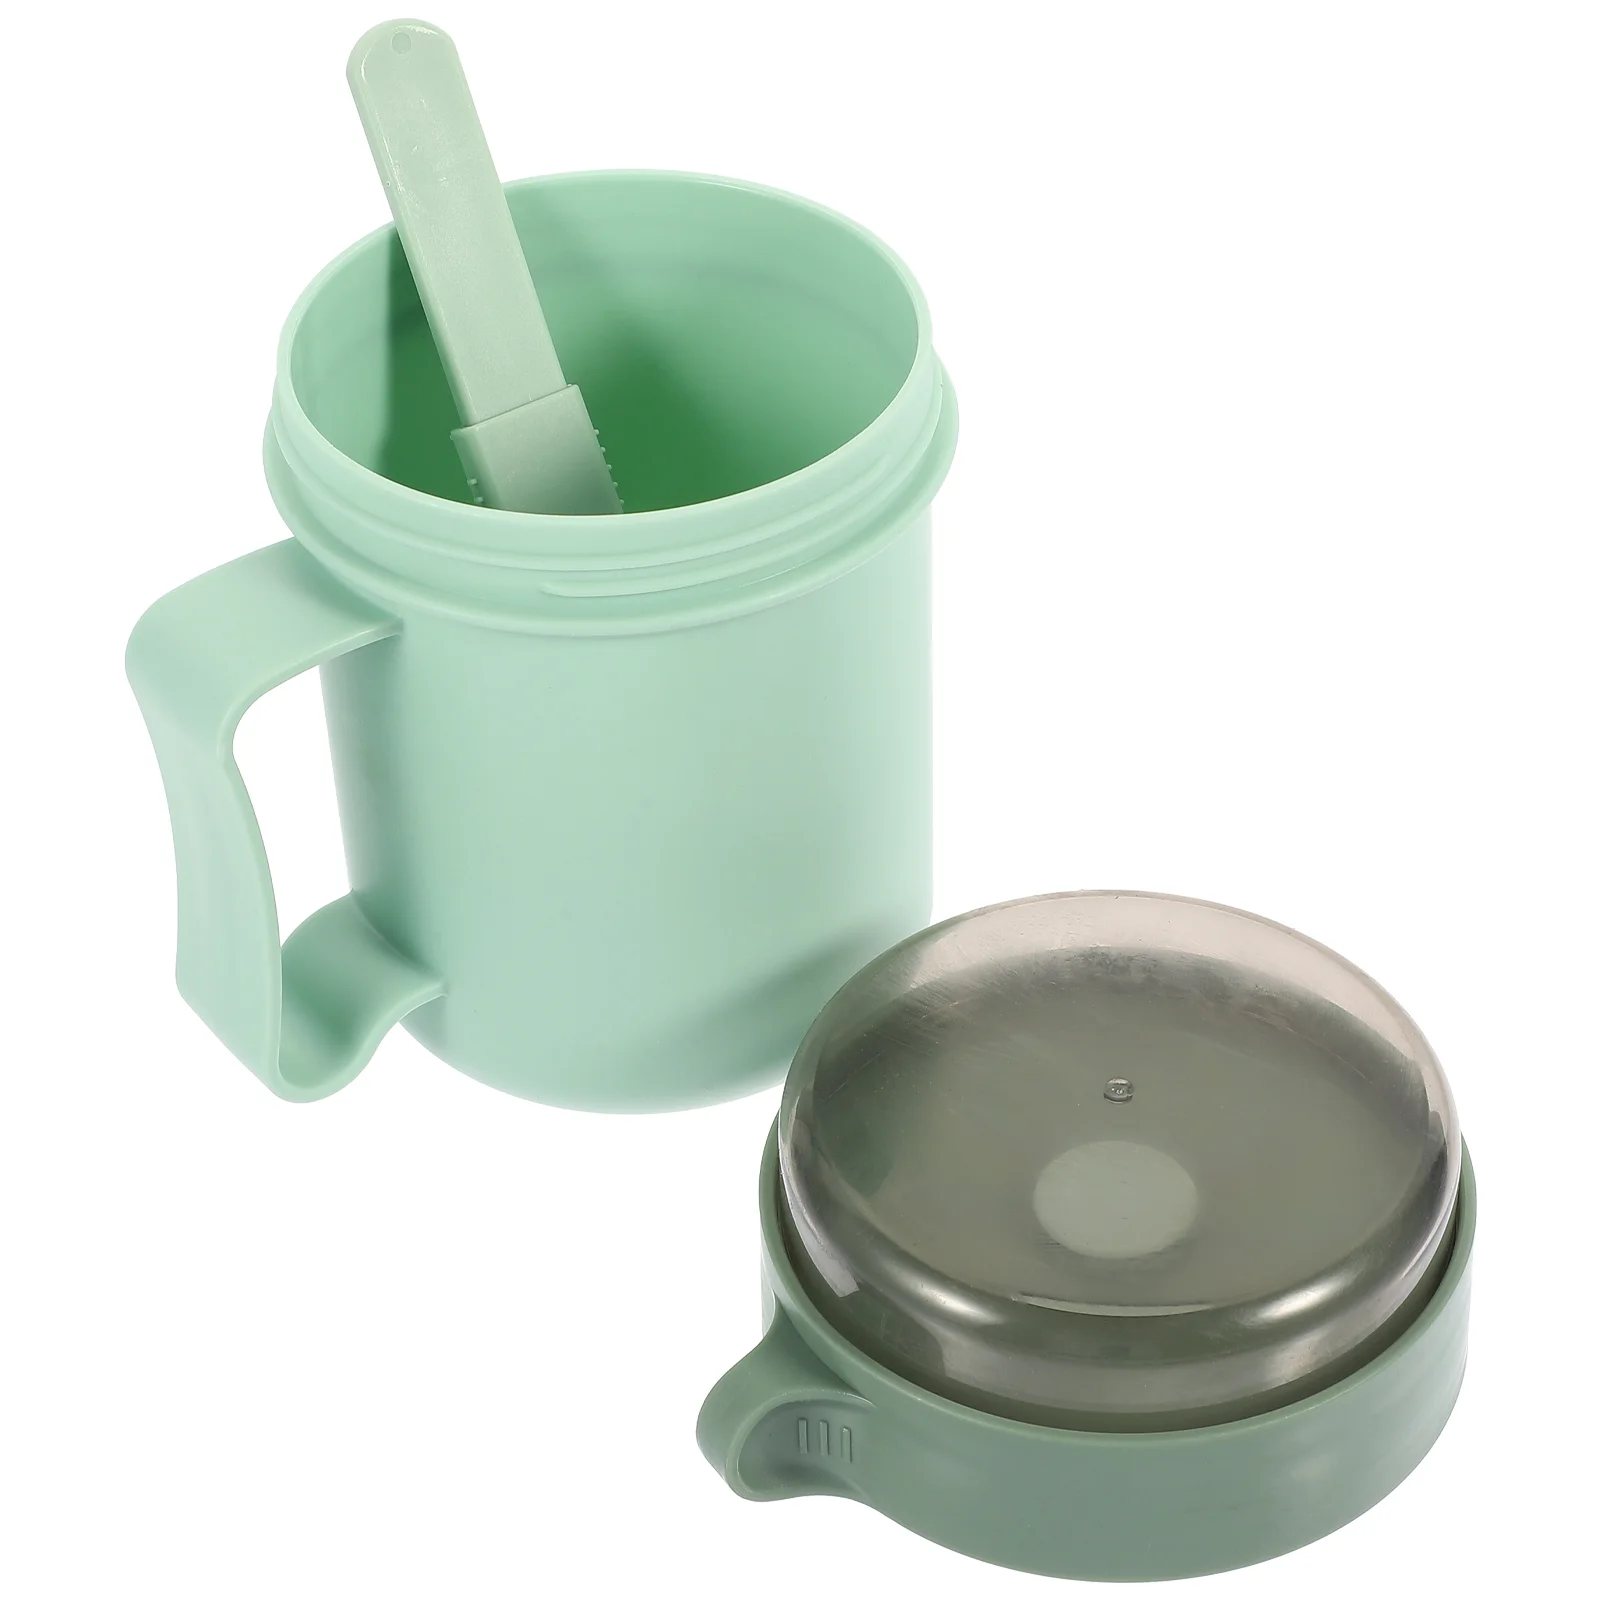 

Cup Soup Portable Breakfast Cereal Container Microwave Jar Mug Hot Lids Lunch Thermal Containers Go Bowl Box Flask Lid The